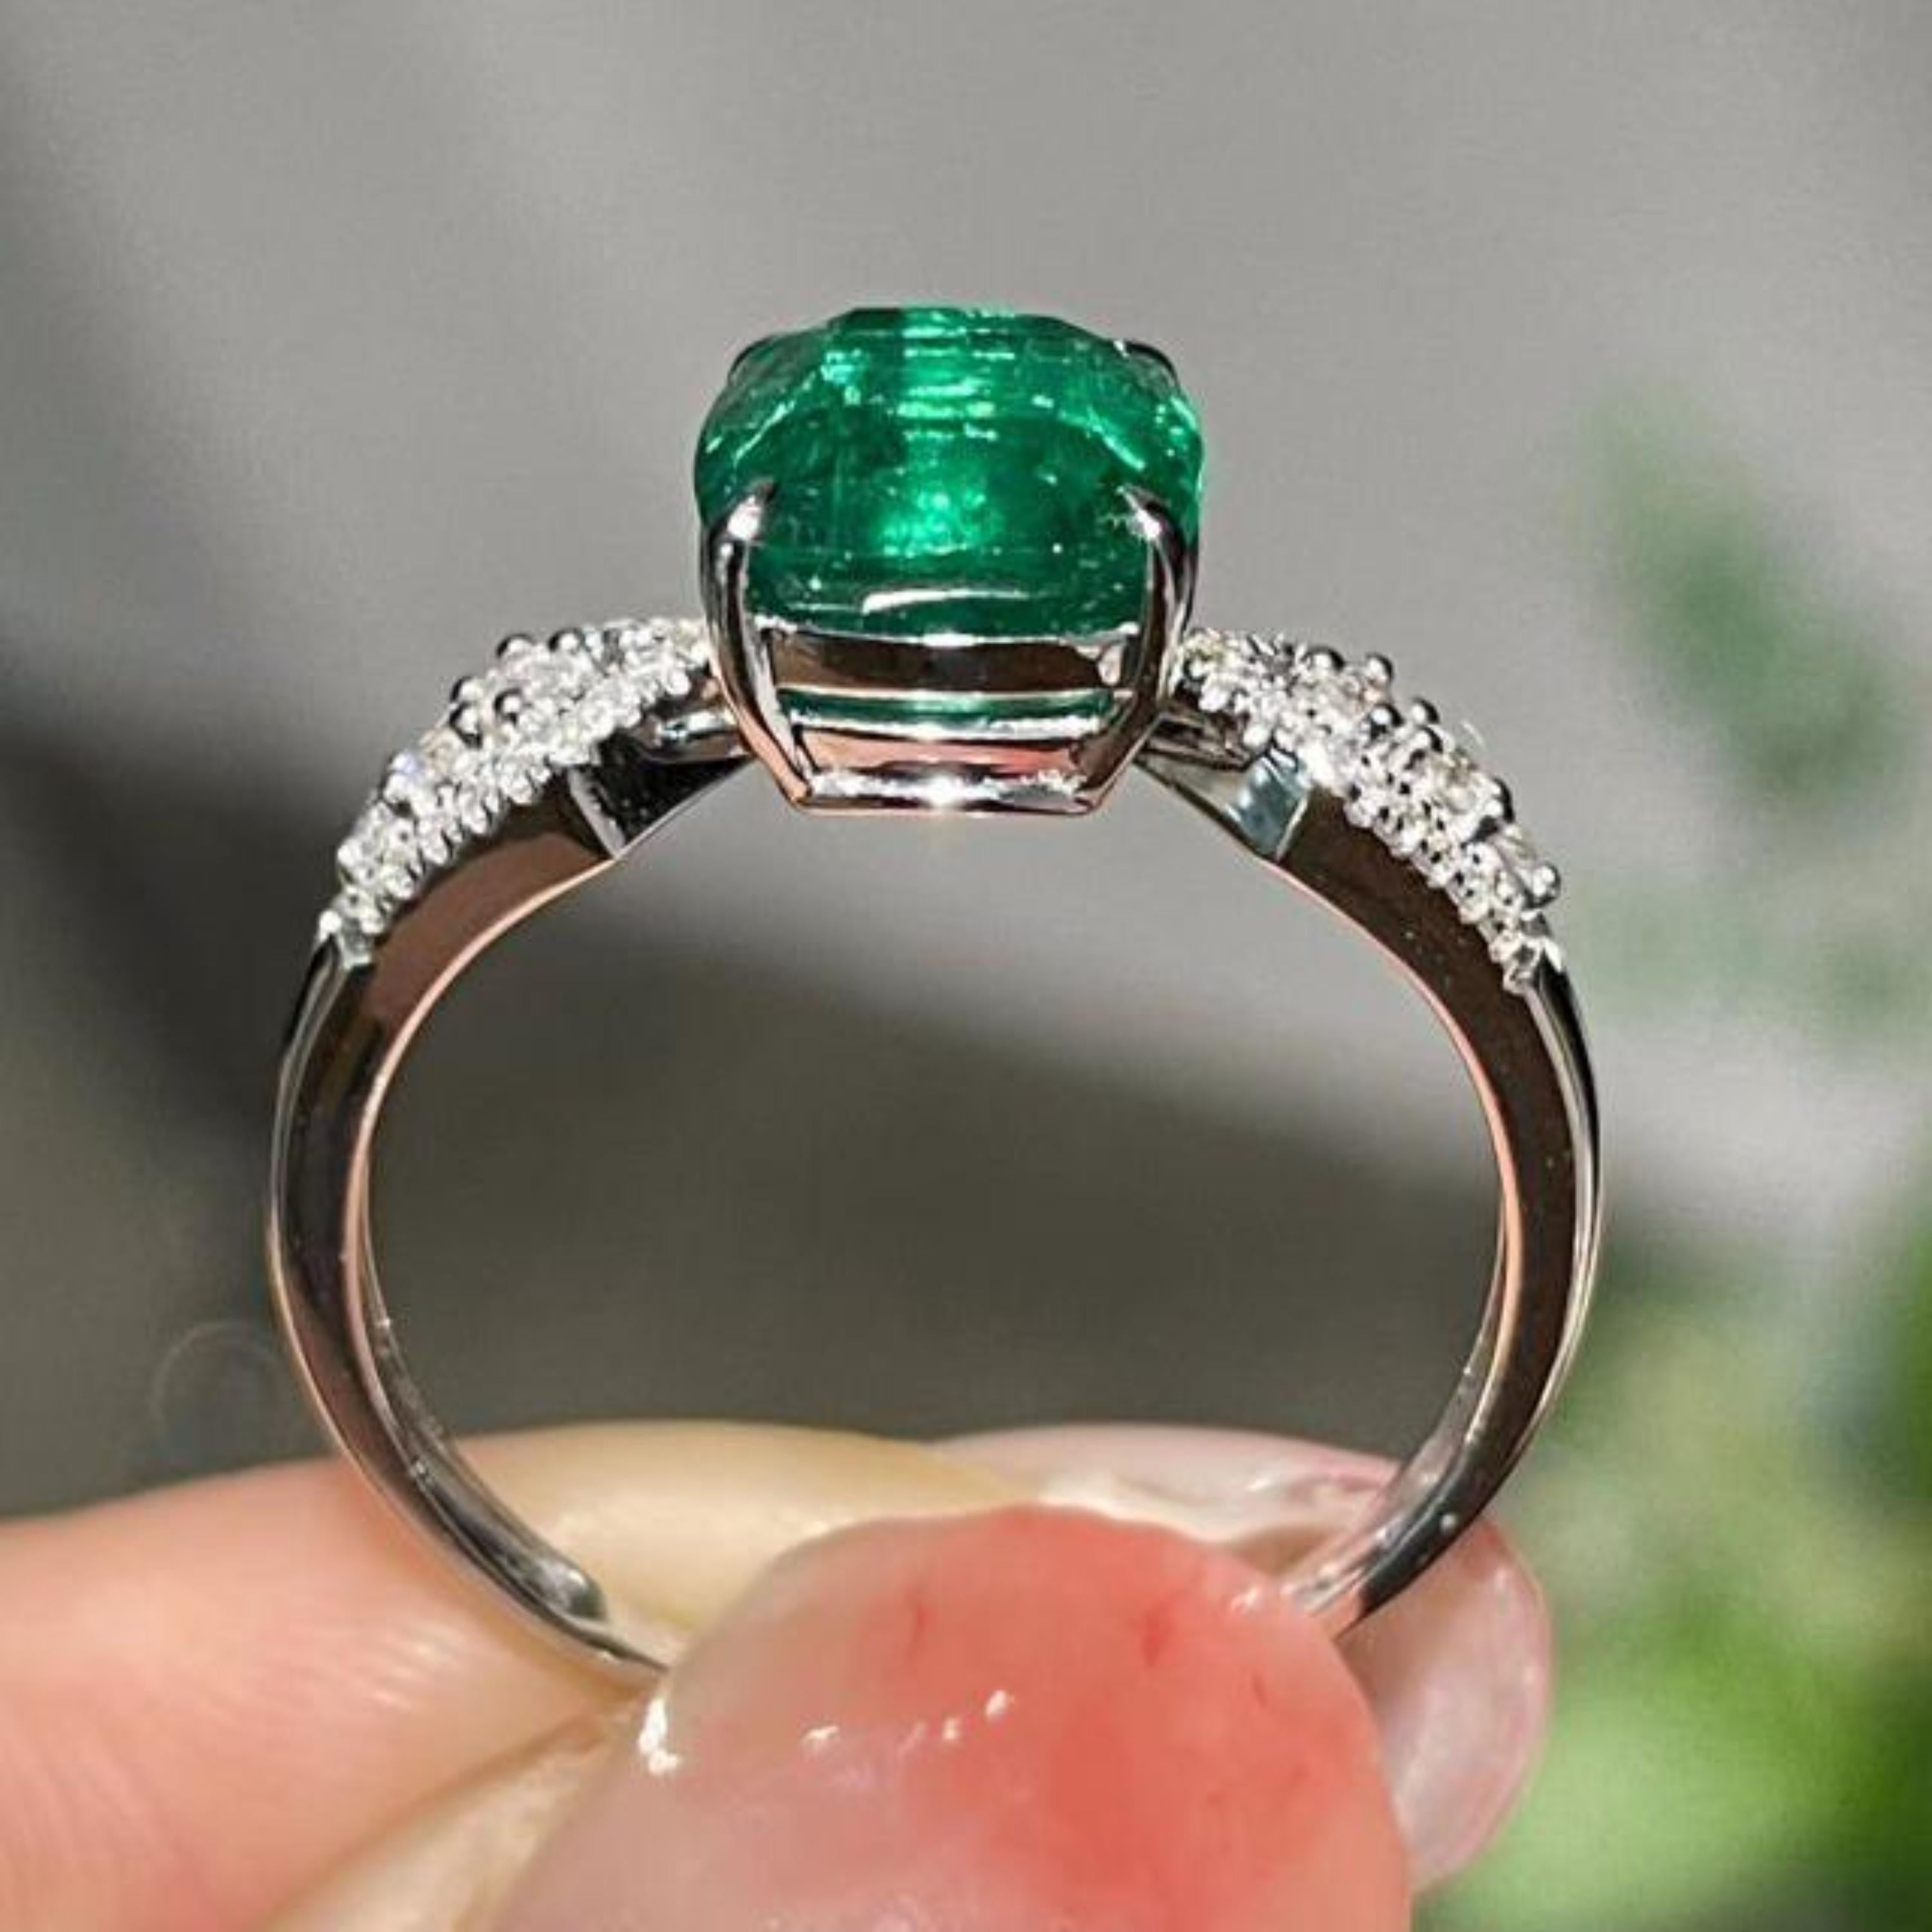 Art Deco 2 Carat Natural Emerald Diamond Engagement Ring Set in 18K Gold, Cocktail Ring For Sale